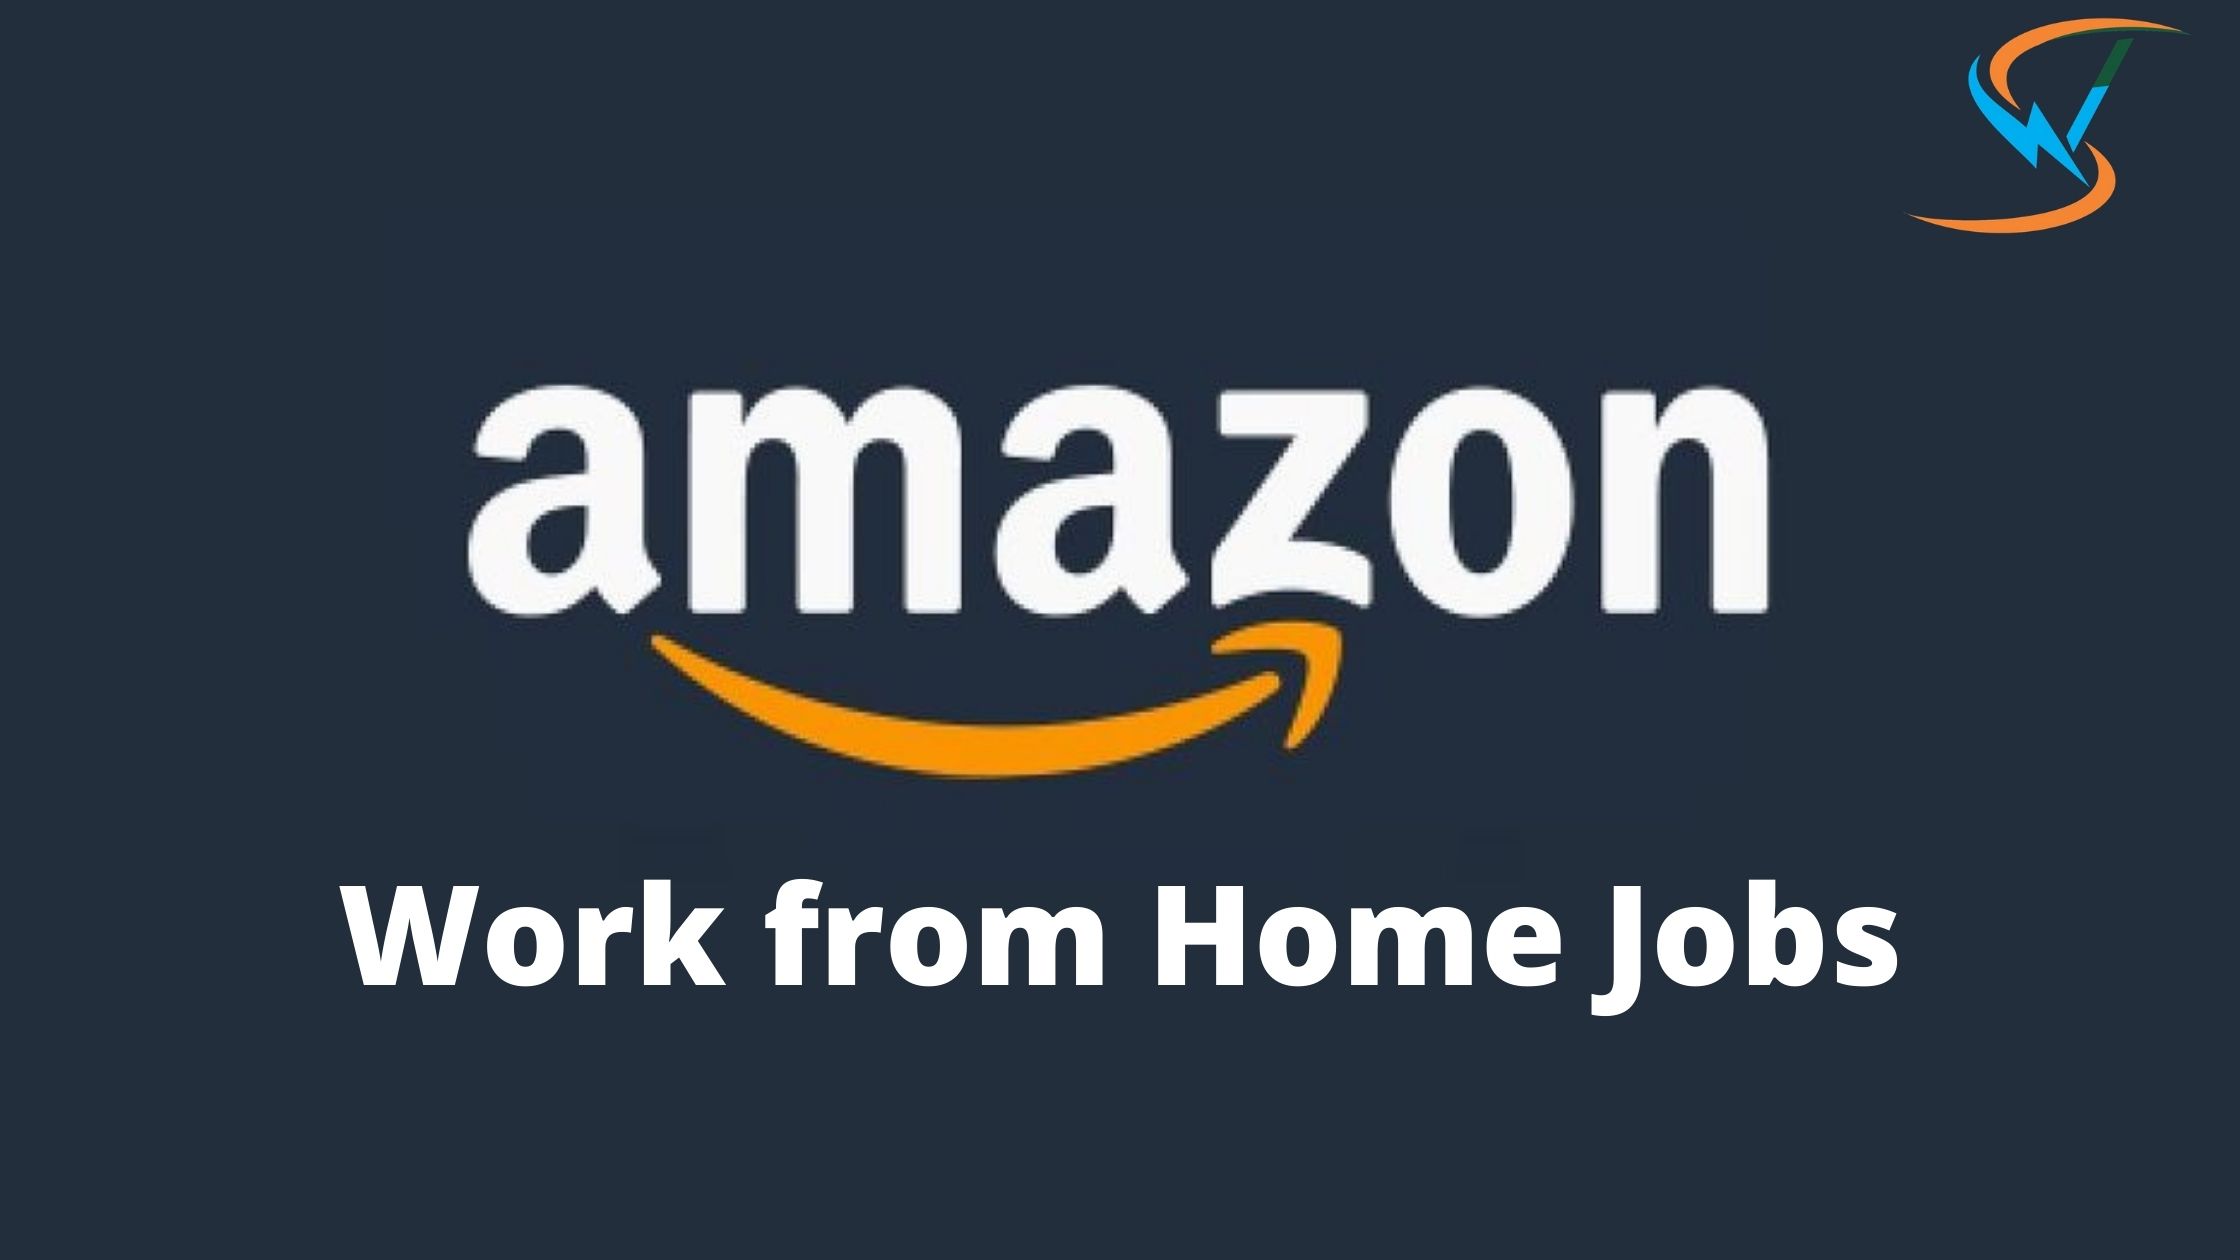 All You Need To Know About Amazon Work From Home Jobs